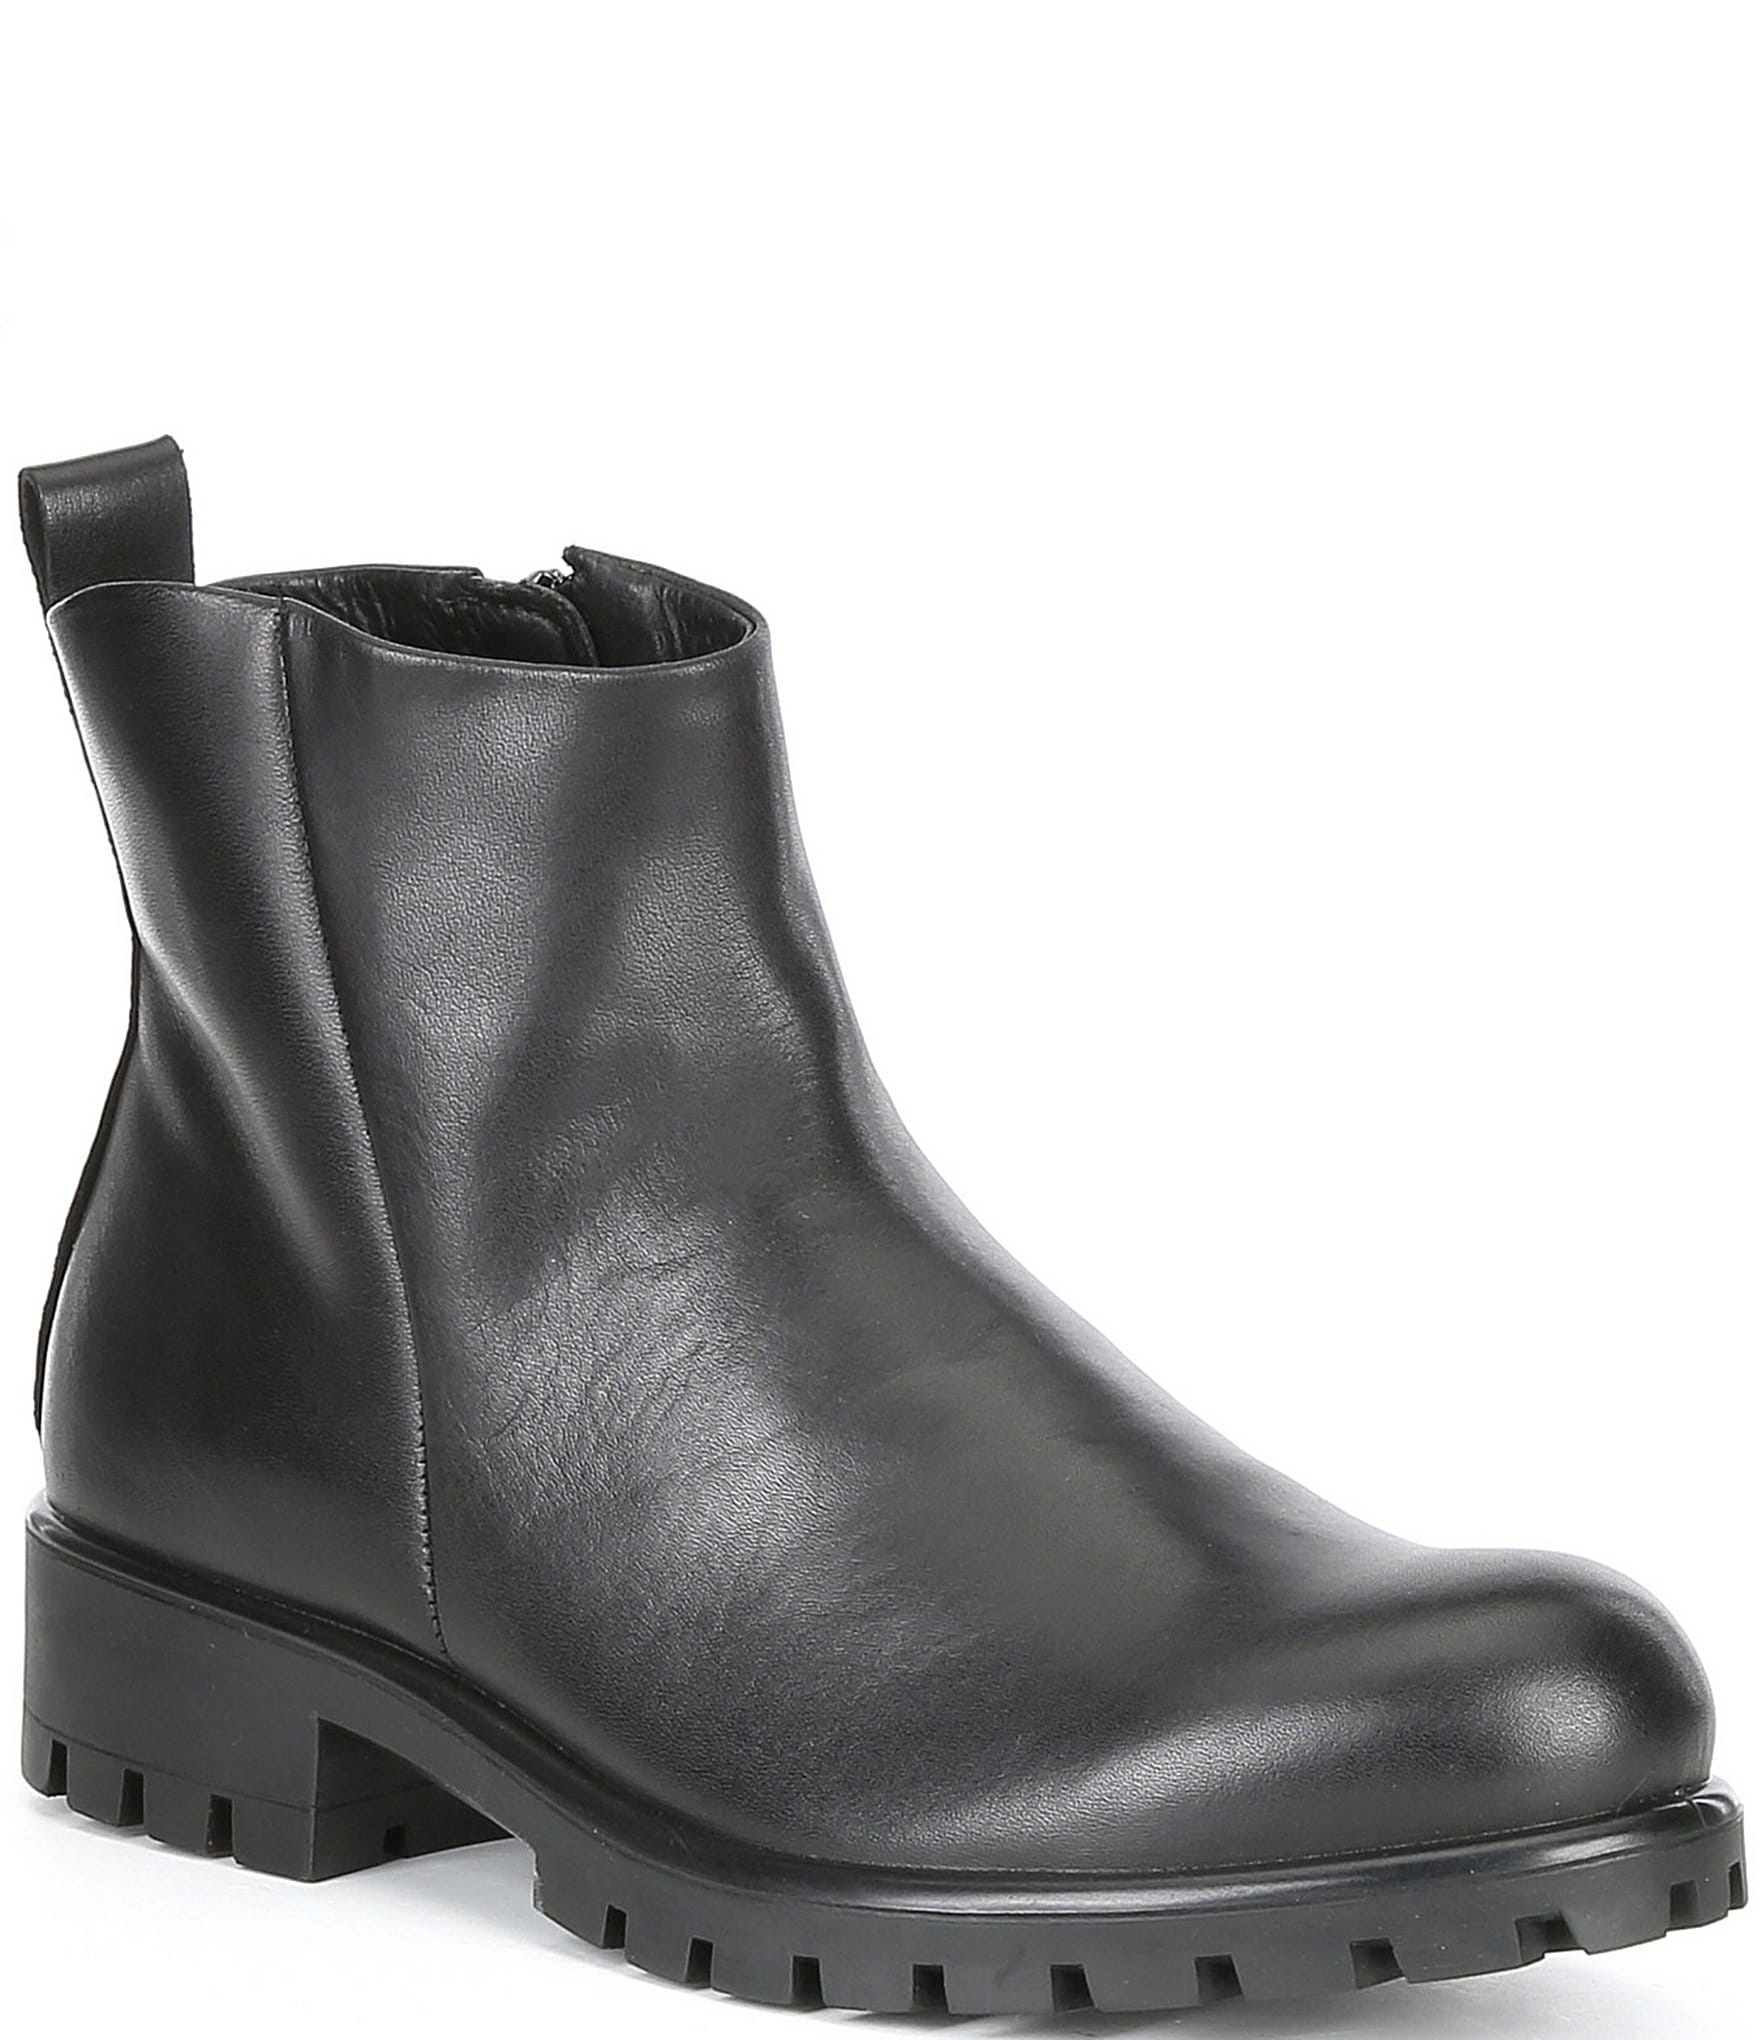 Ecco Boots For Women | vlr.eng.br